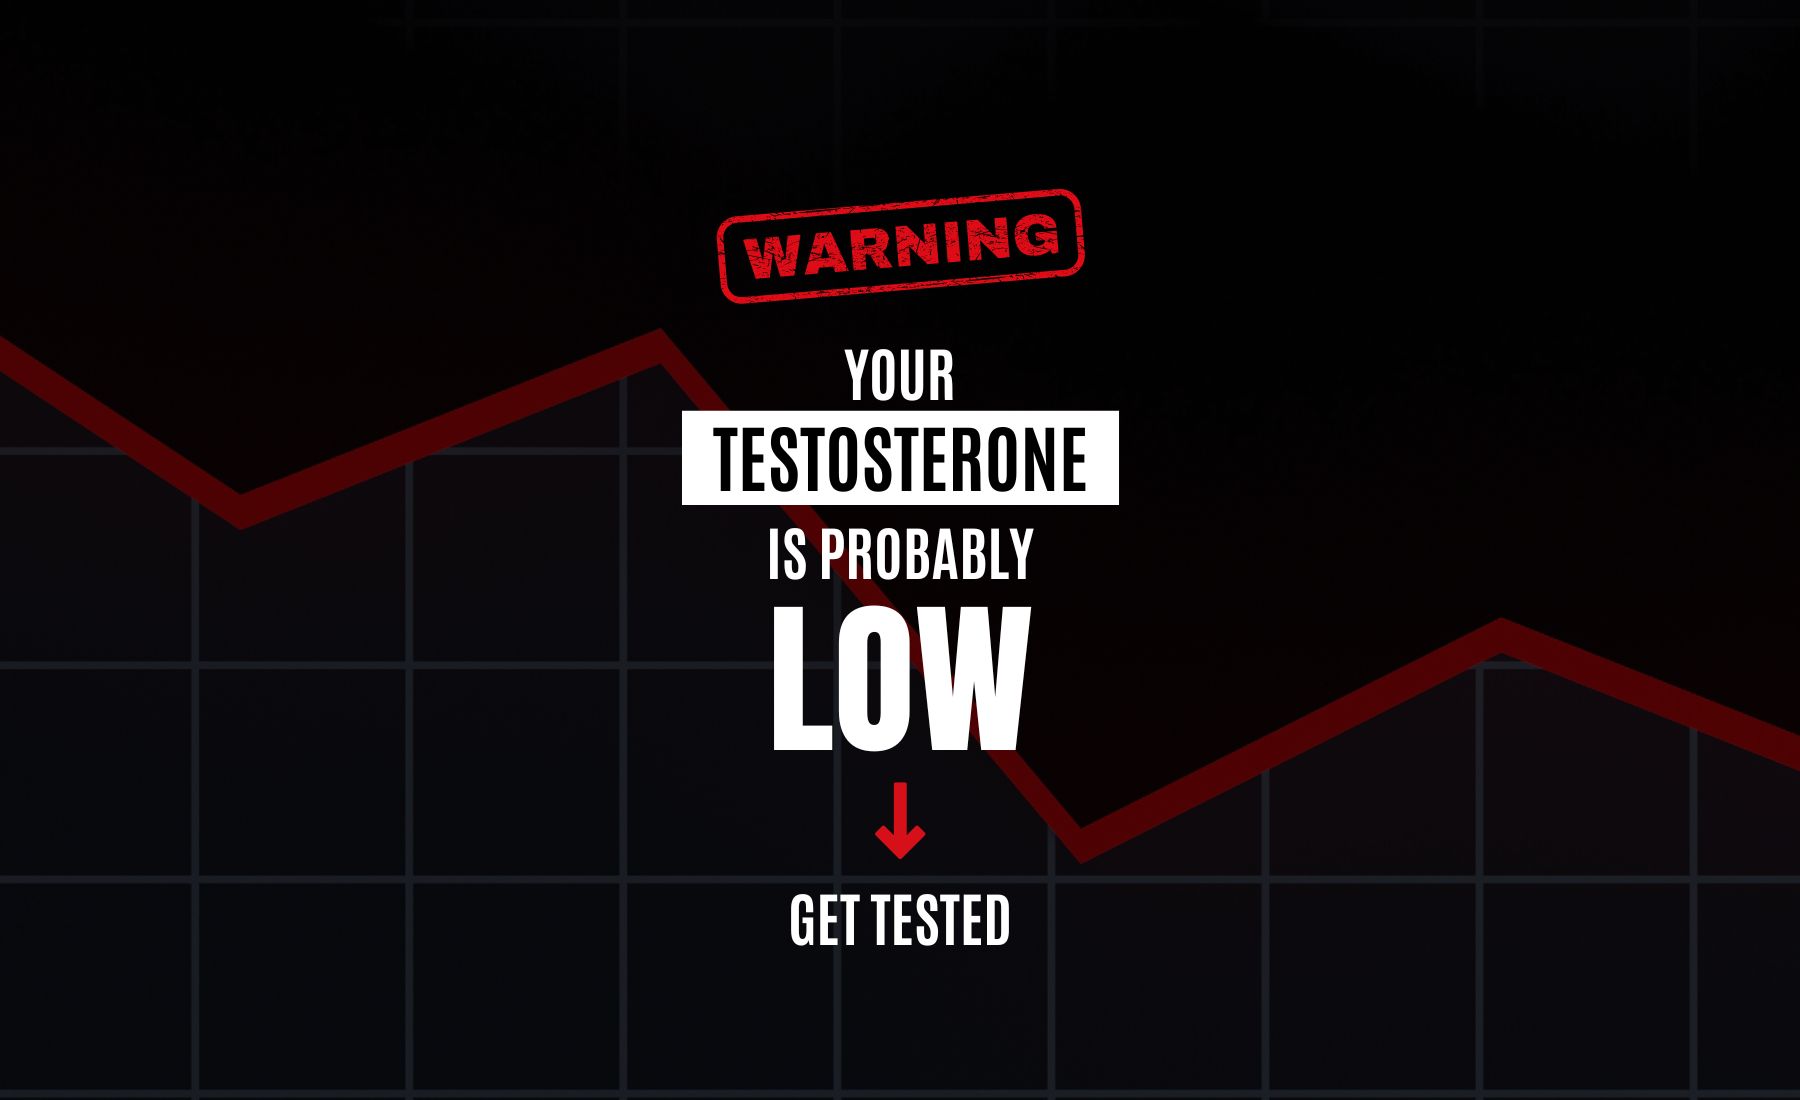 Get Your Test Tested!